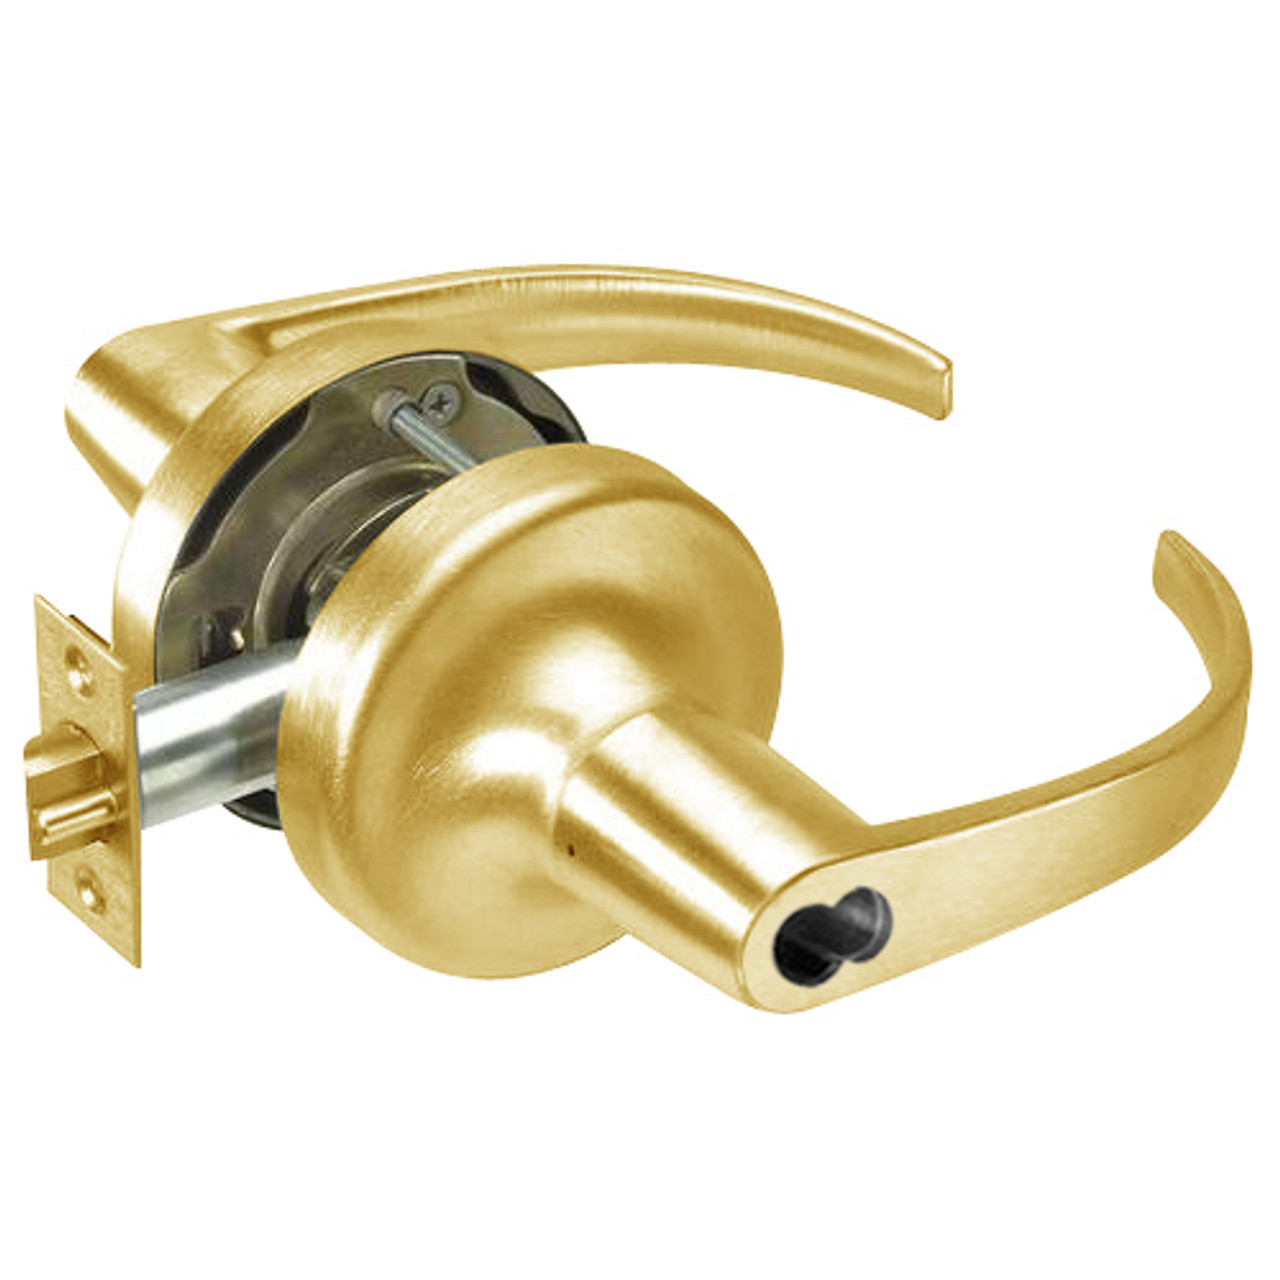 B-PB5307LN-605 Yale 5300LN Series Single Cylinder Entry Cylindrical Lock with Pacific Beach Lever Prepped for SFIC in Bright Brass